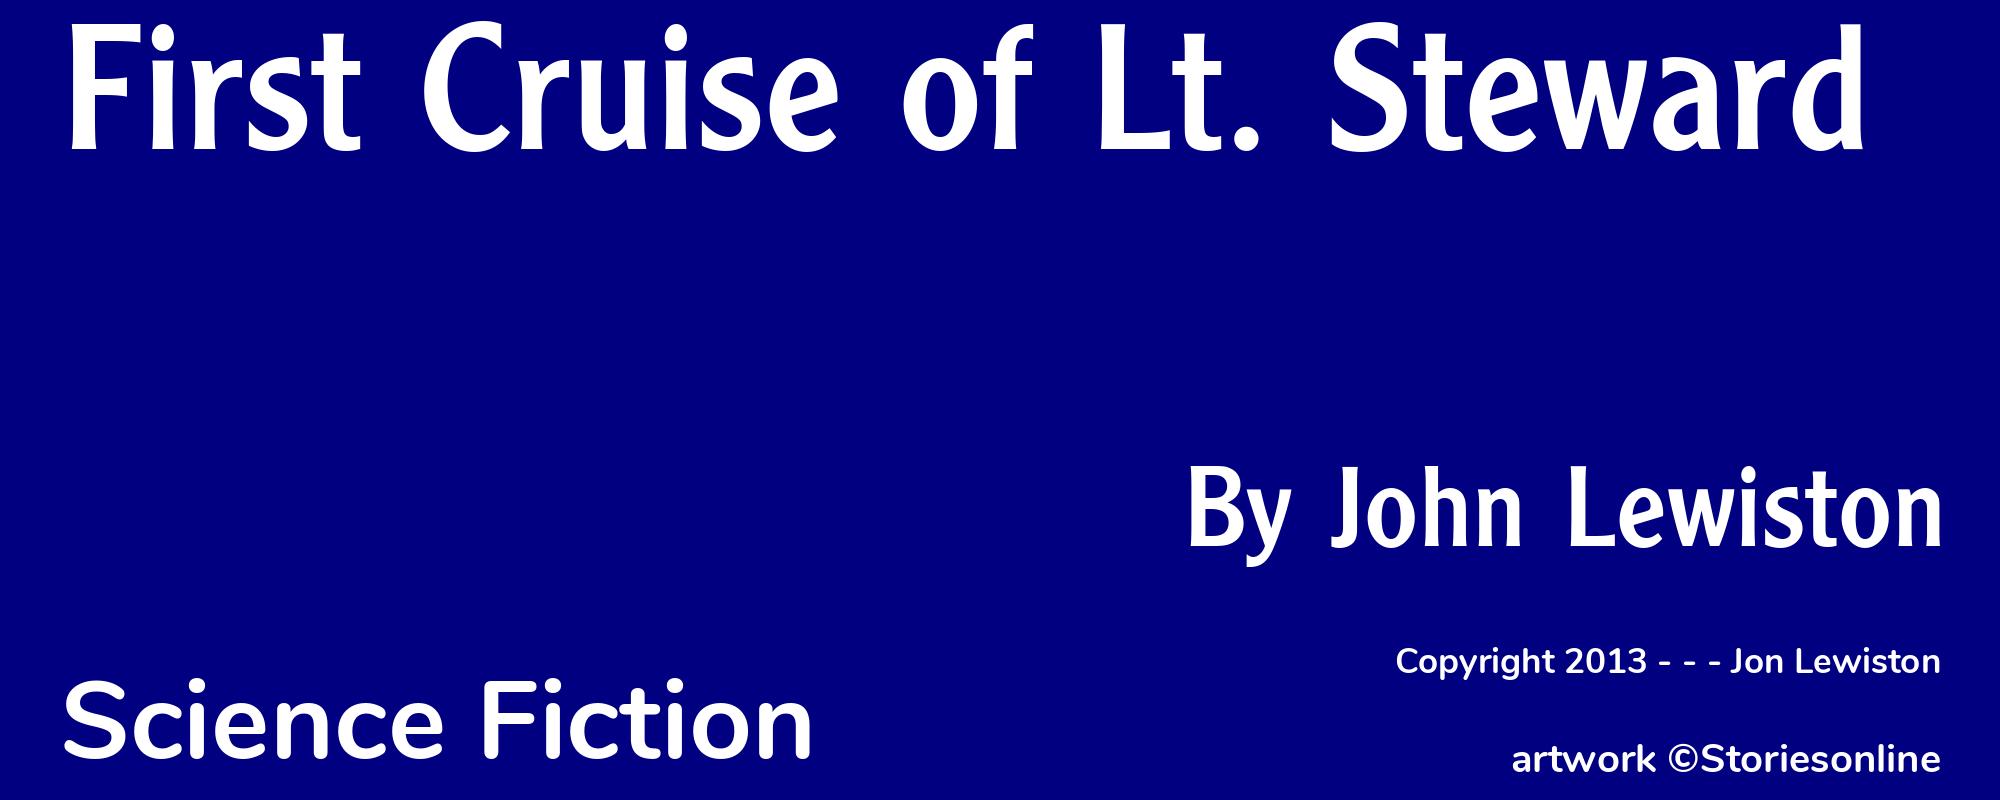 First Cruise of Lt. Steward - Cover